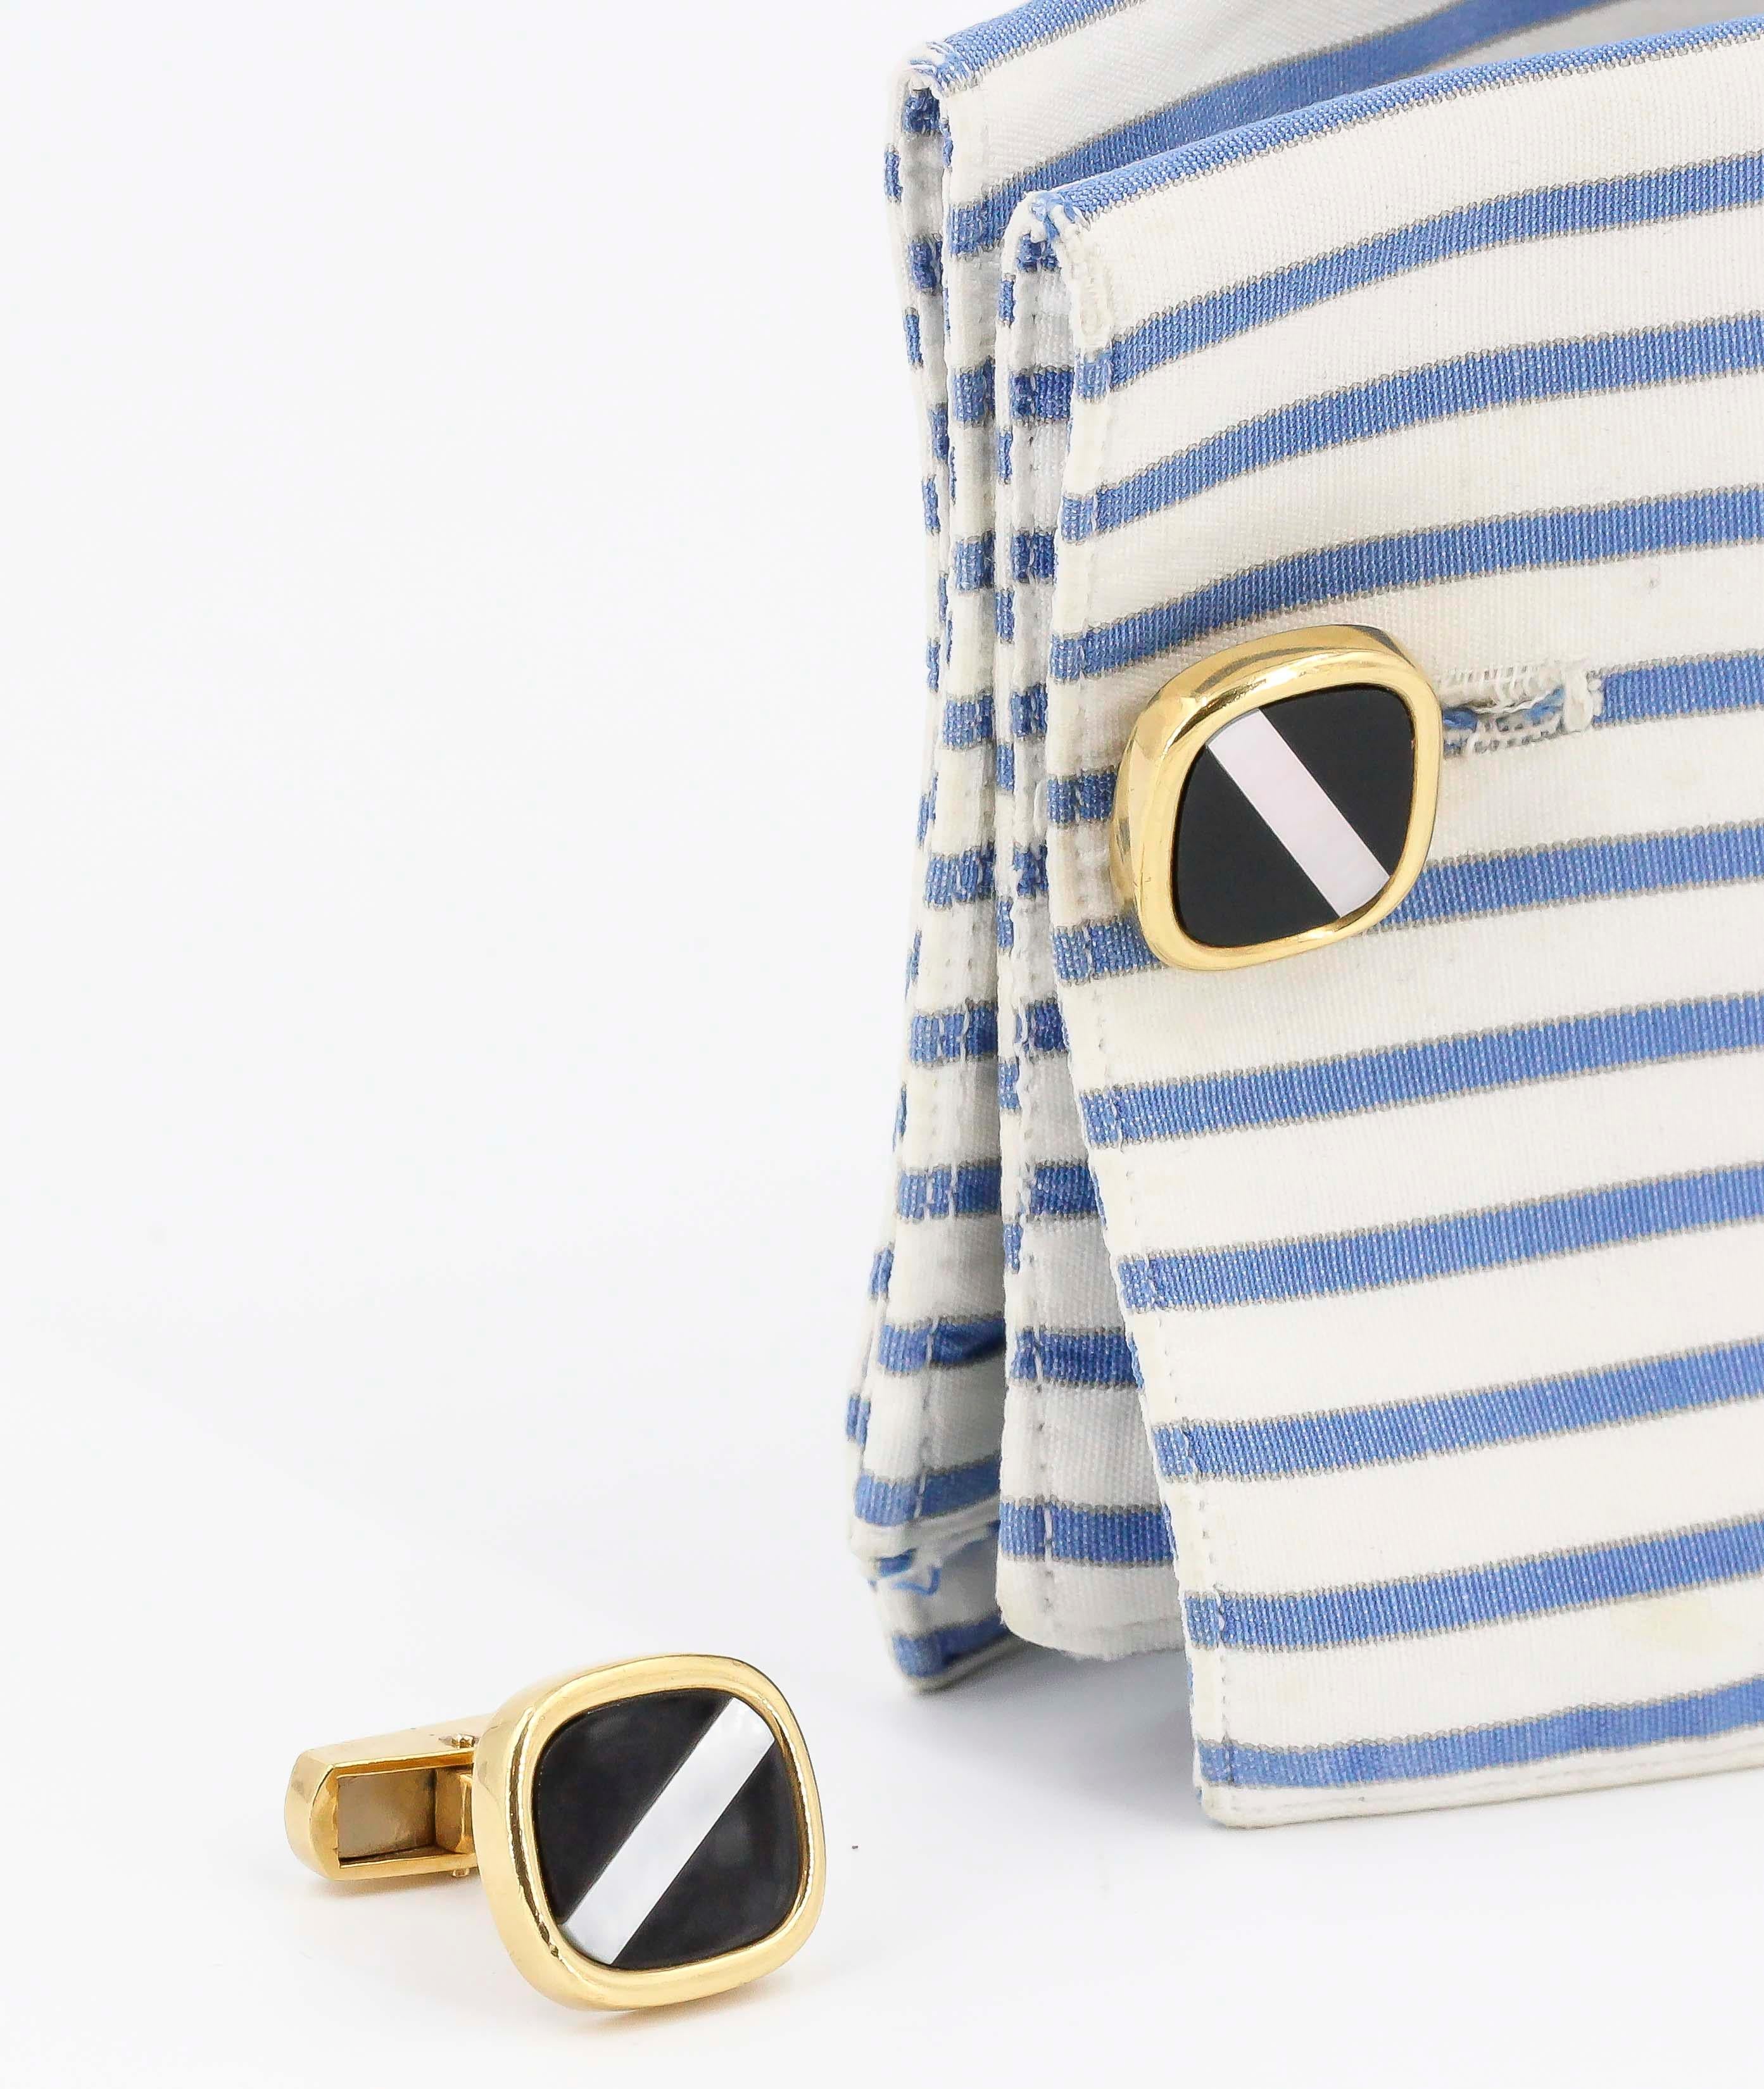 Inlaid Mother-of-pearl, Onyx and 18 Karat Gold Cufflinks 4